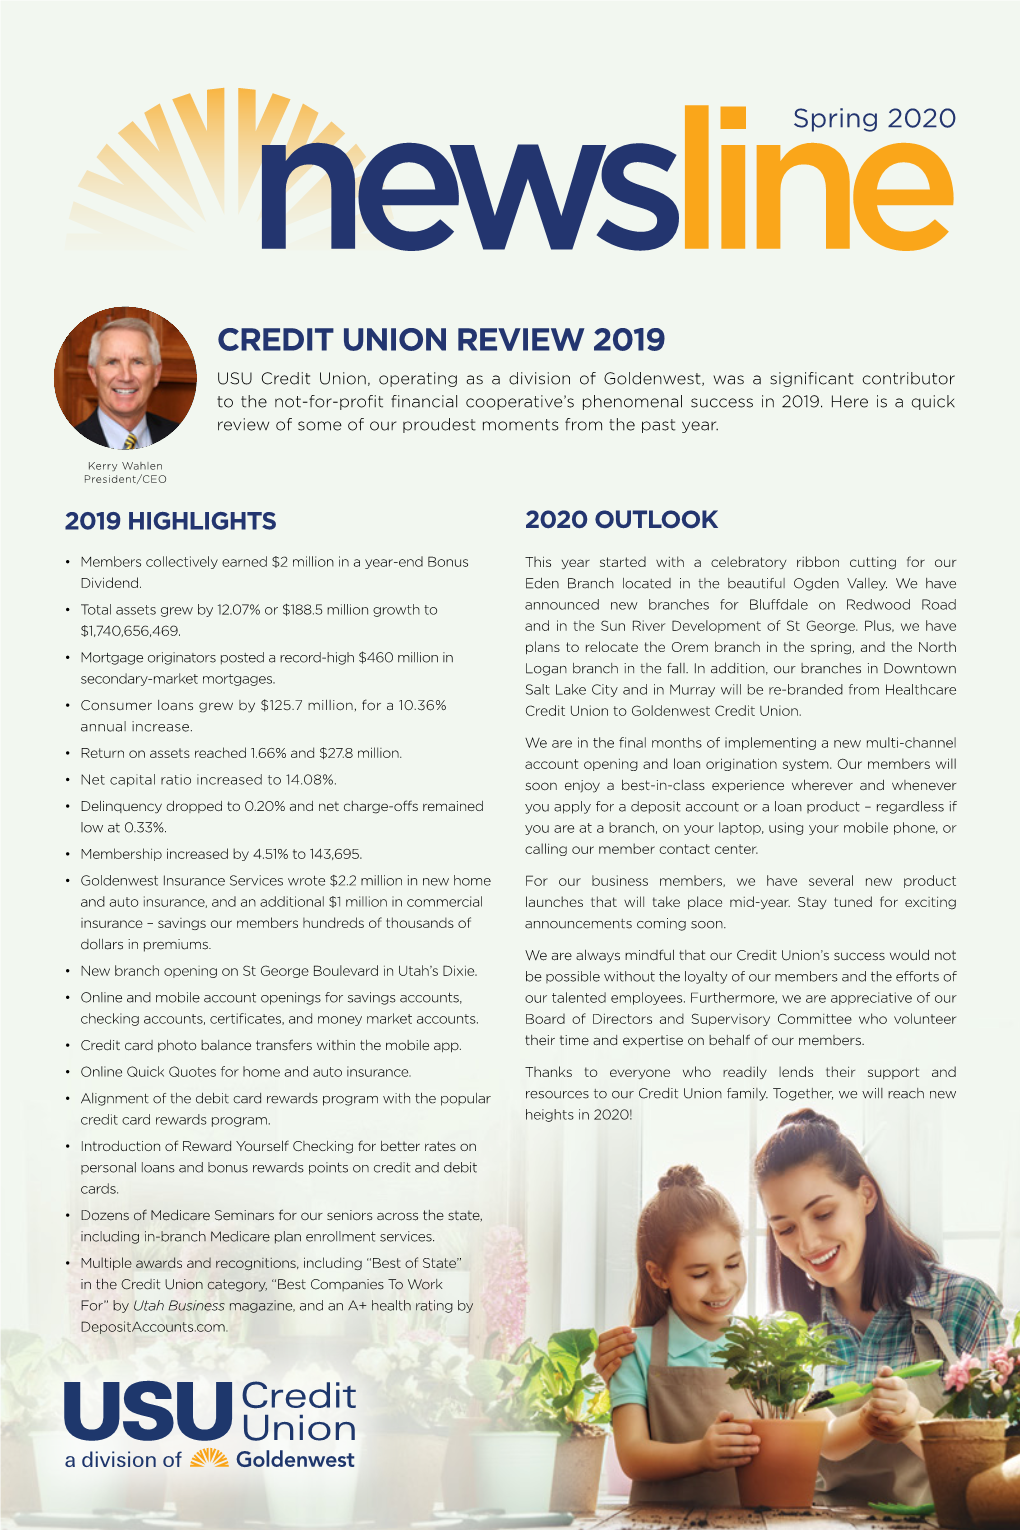 Credit Union Review 2019